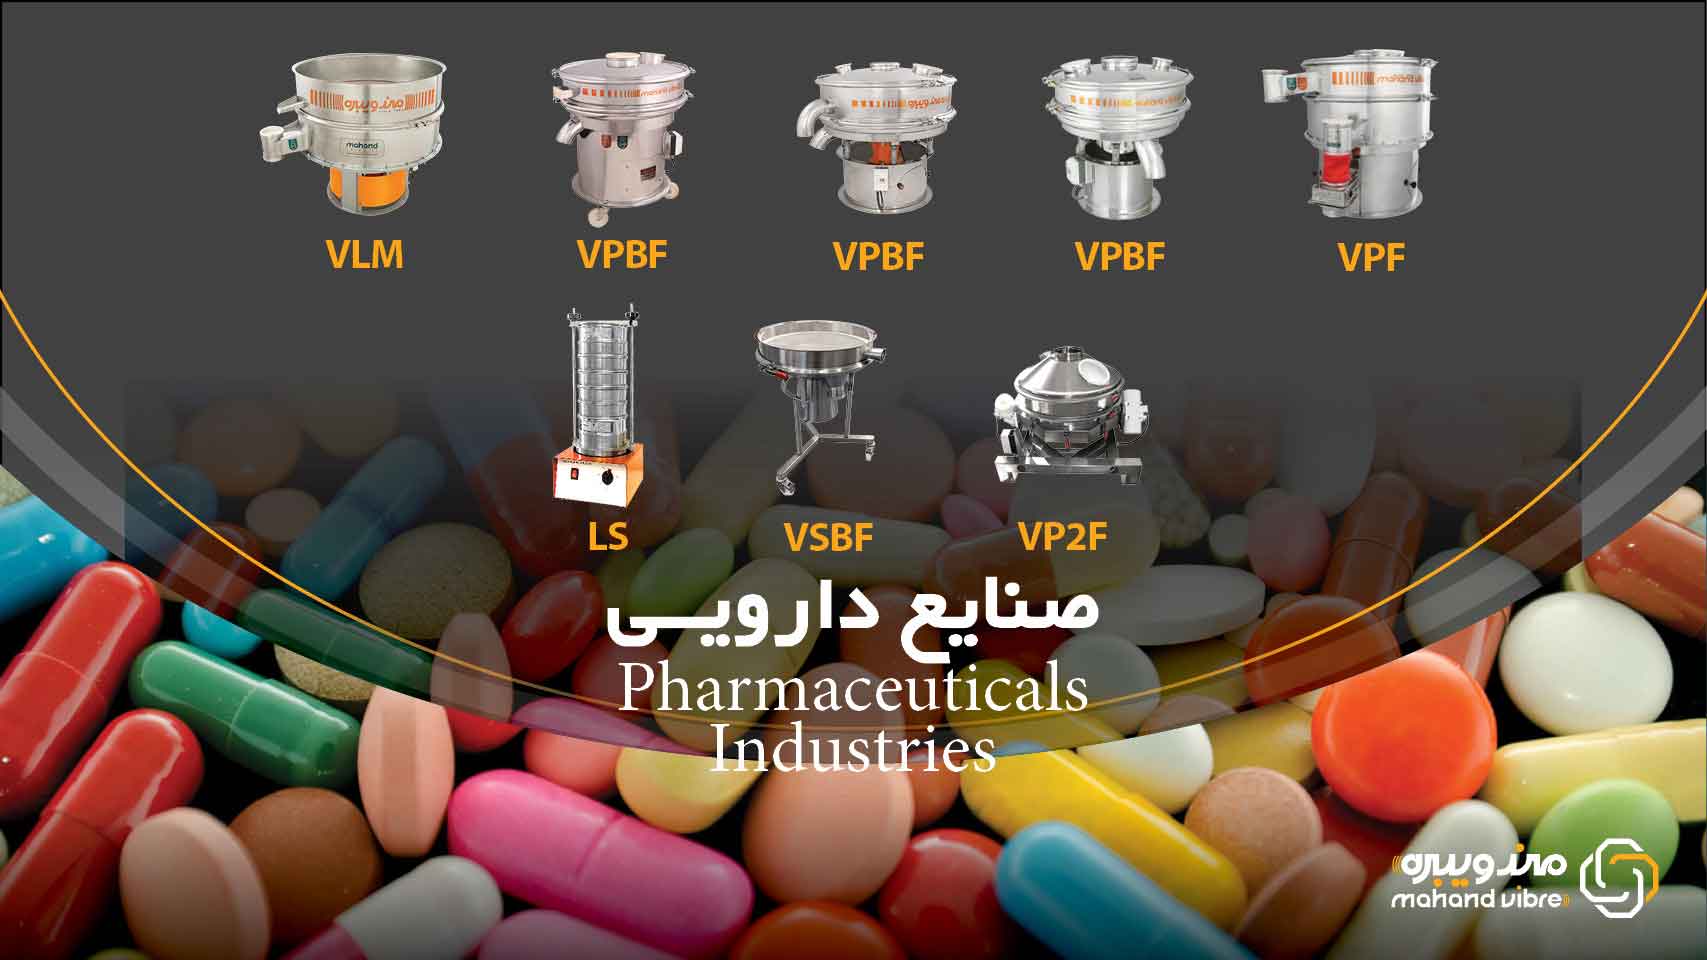 A collection of vibrating sieves and filters for pharmaceutical and powder industries